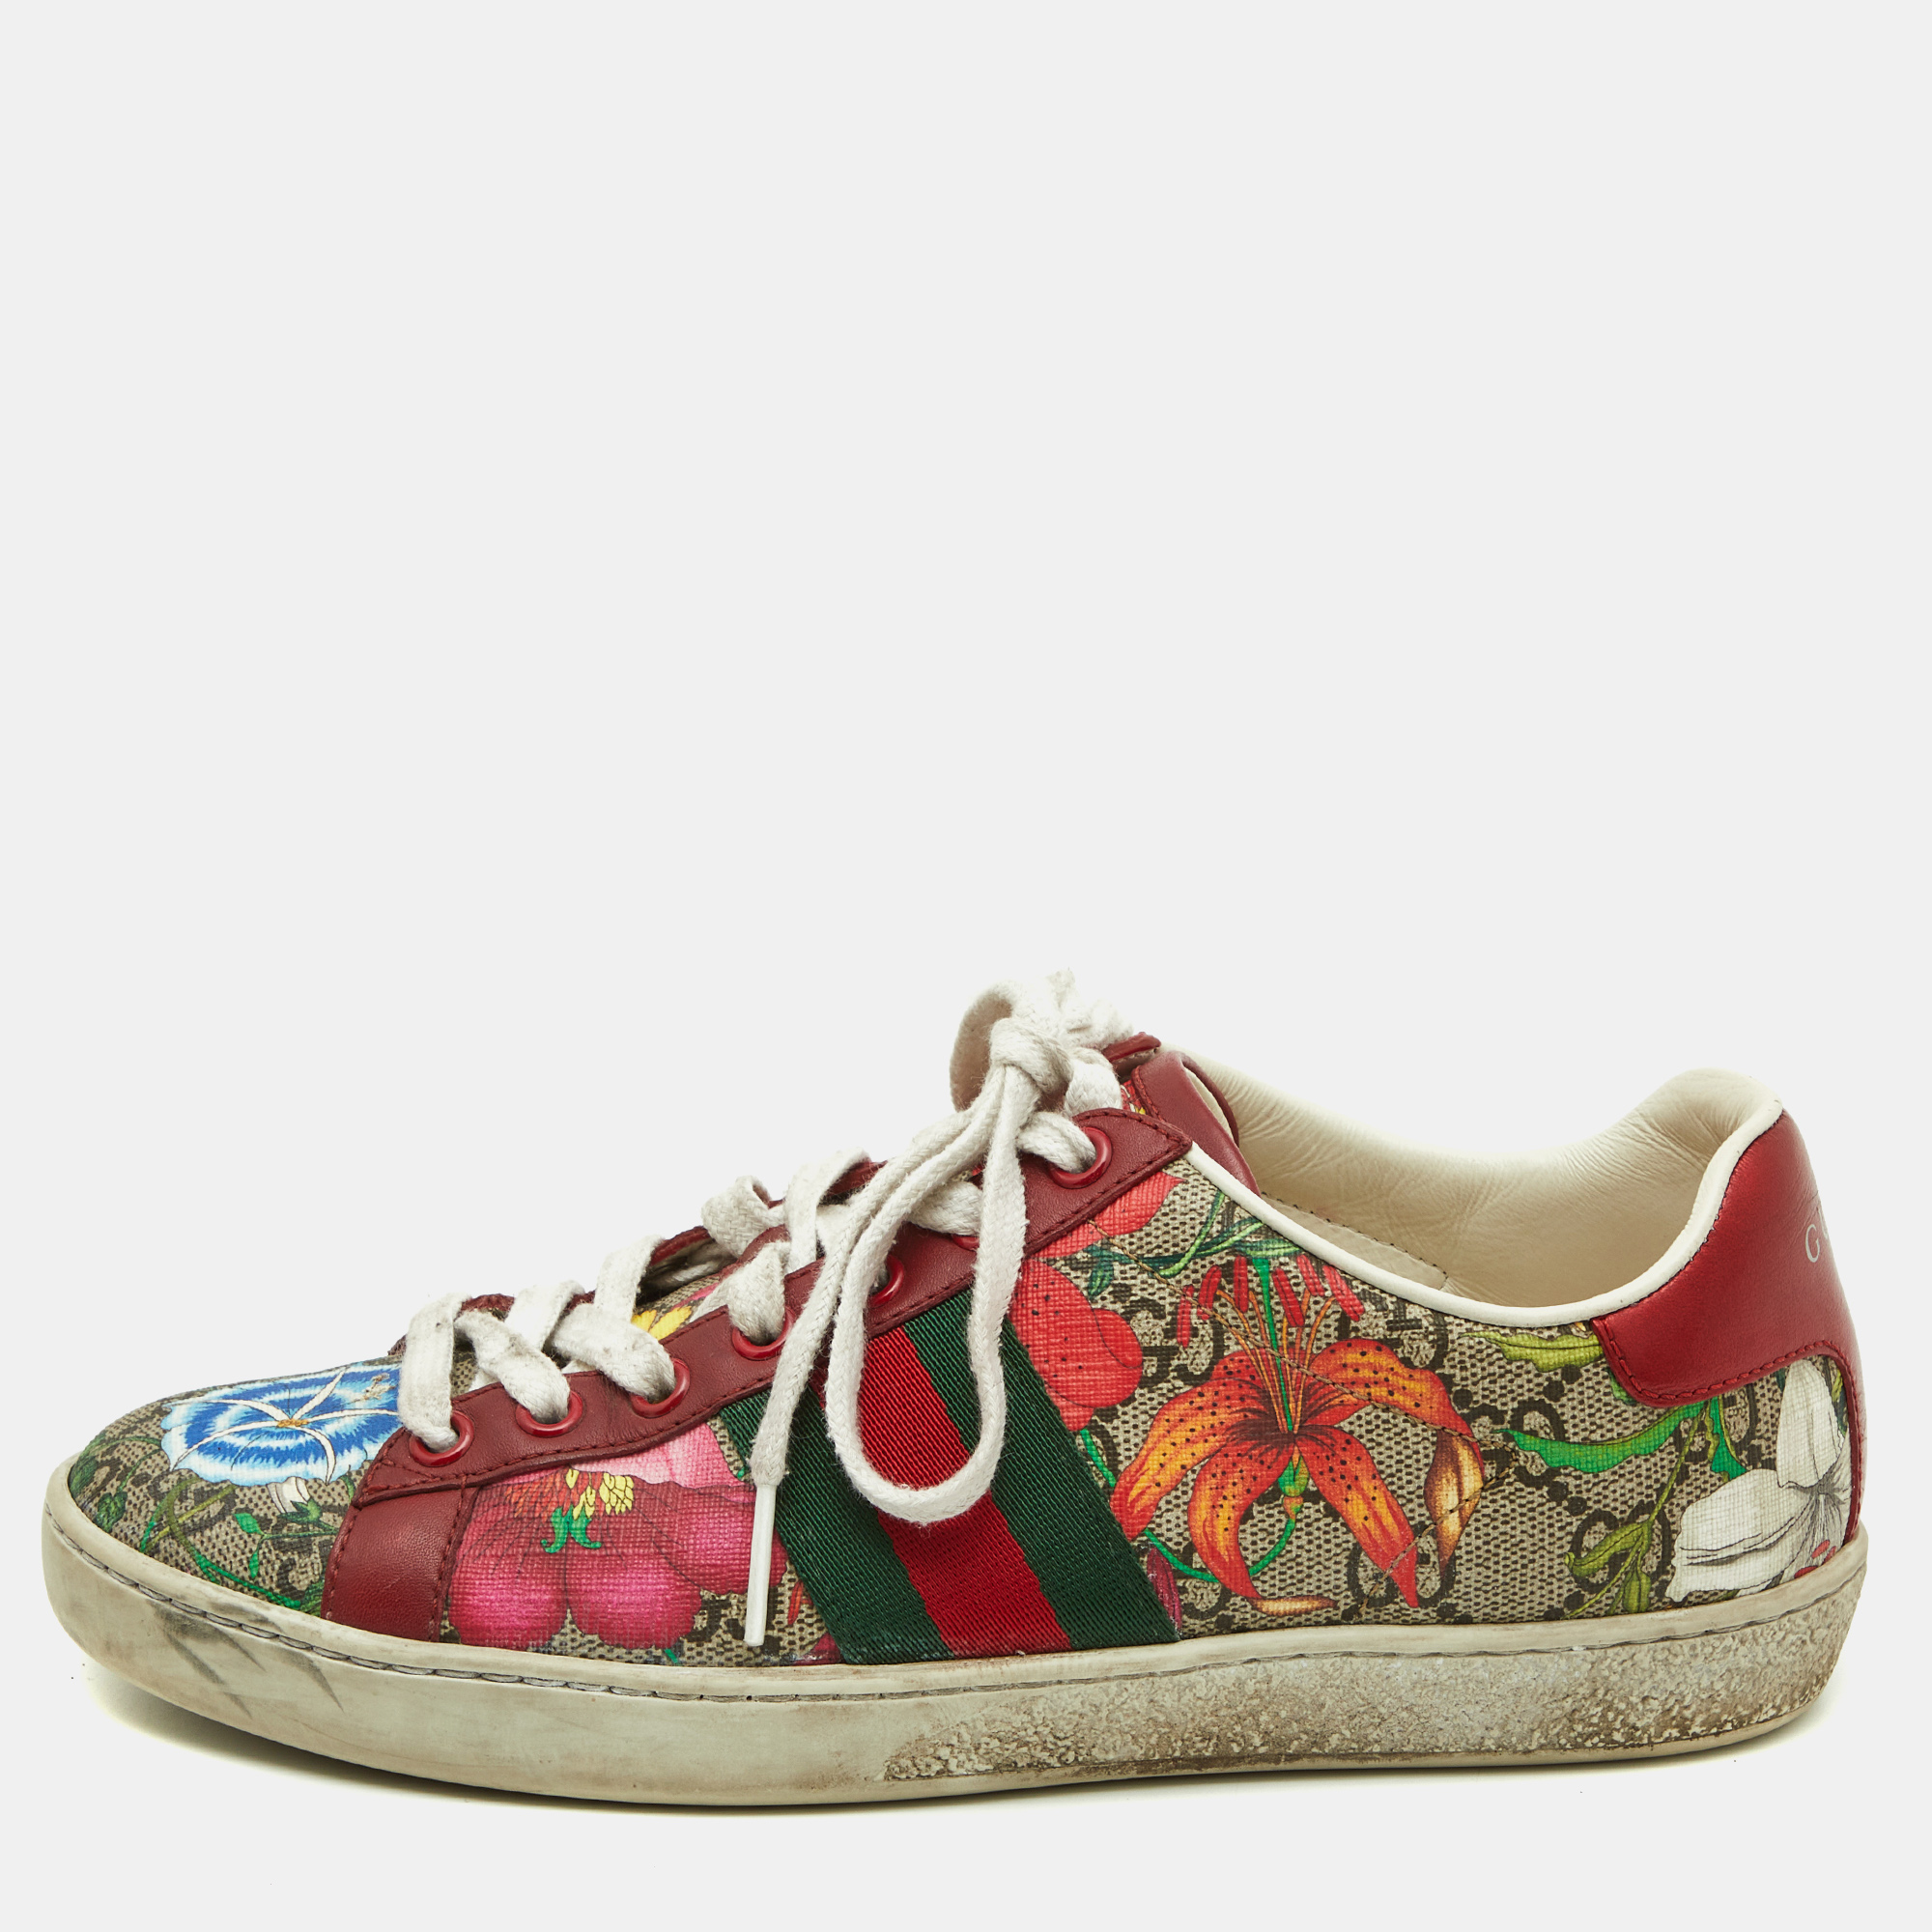 

Gucci Multicolor Floral Print GG Supreme Canvas and Leather Ace Low Top Sneakers Size